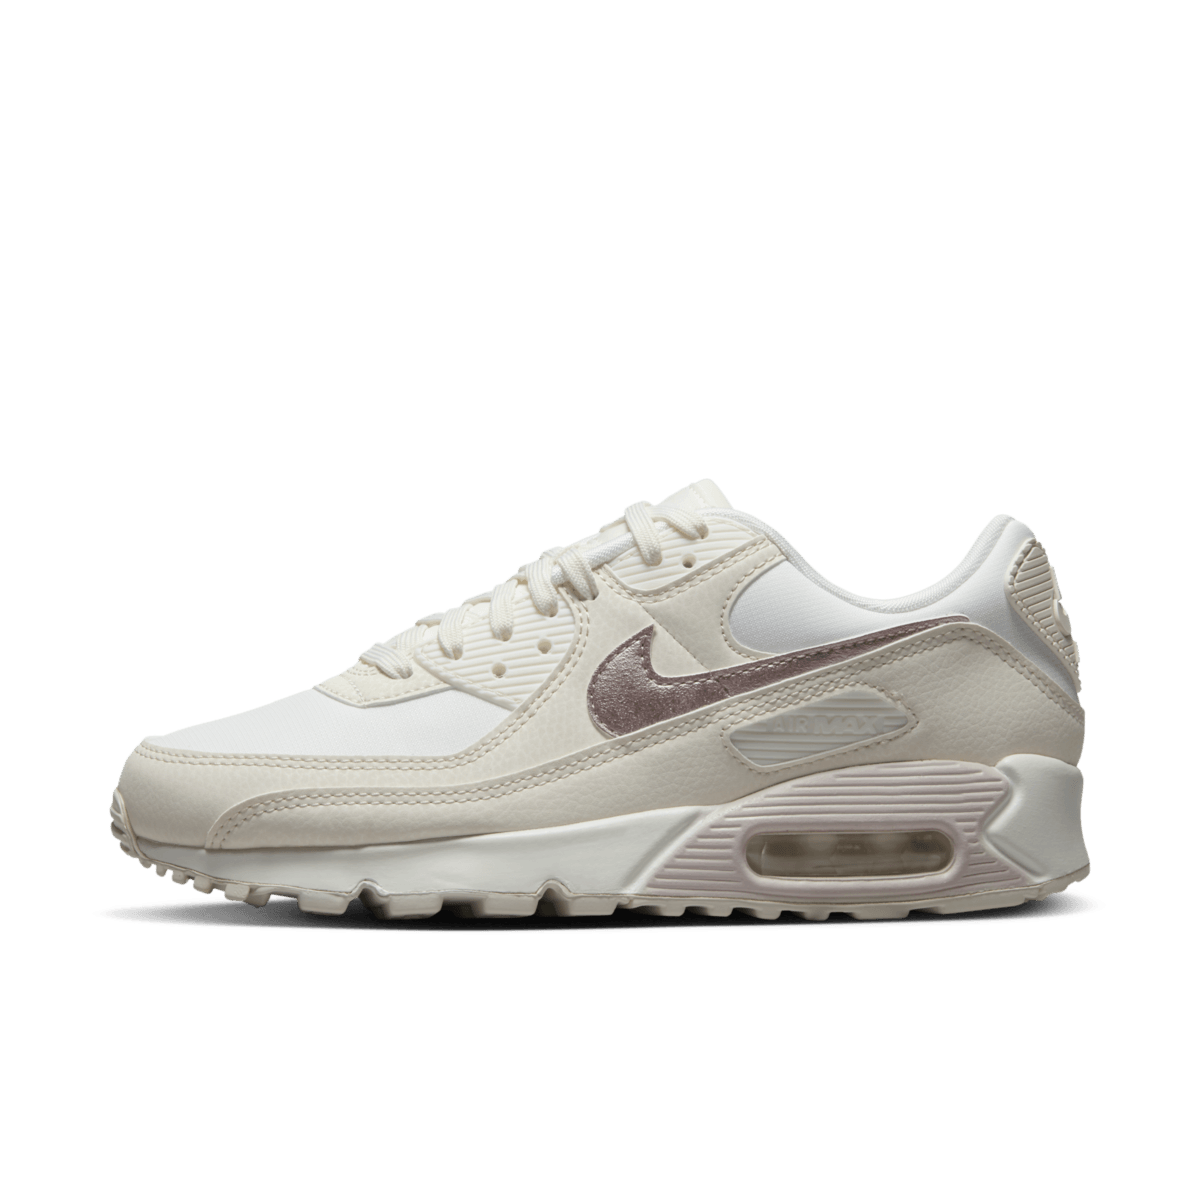 Nike Air Max 90 WMNS 'Pink Oxford' DX0115-101